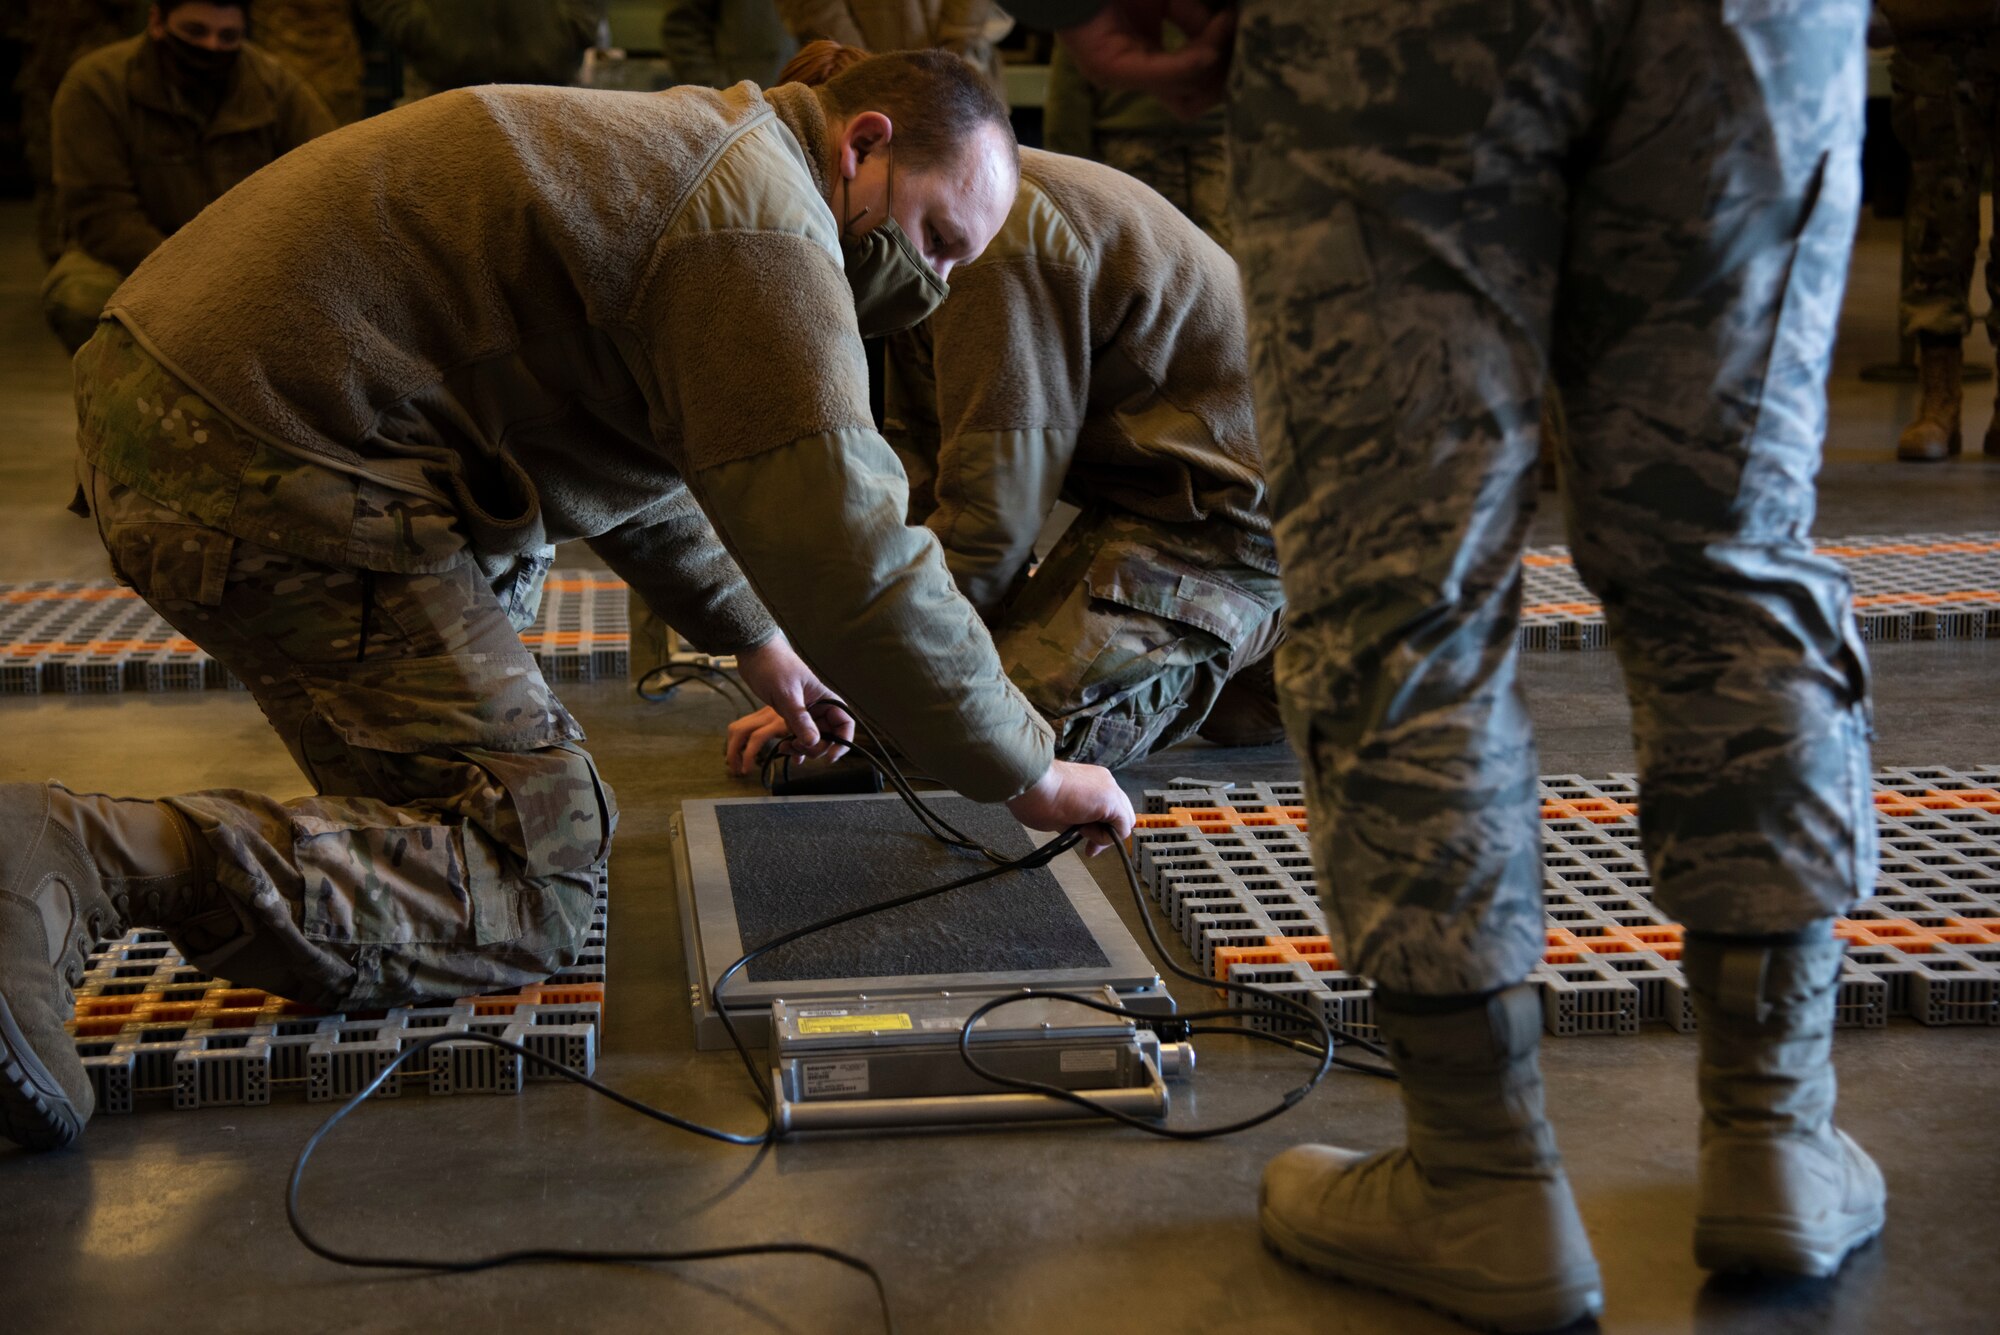 Airmen are kneeling on the ground to connecting wires to a scale